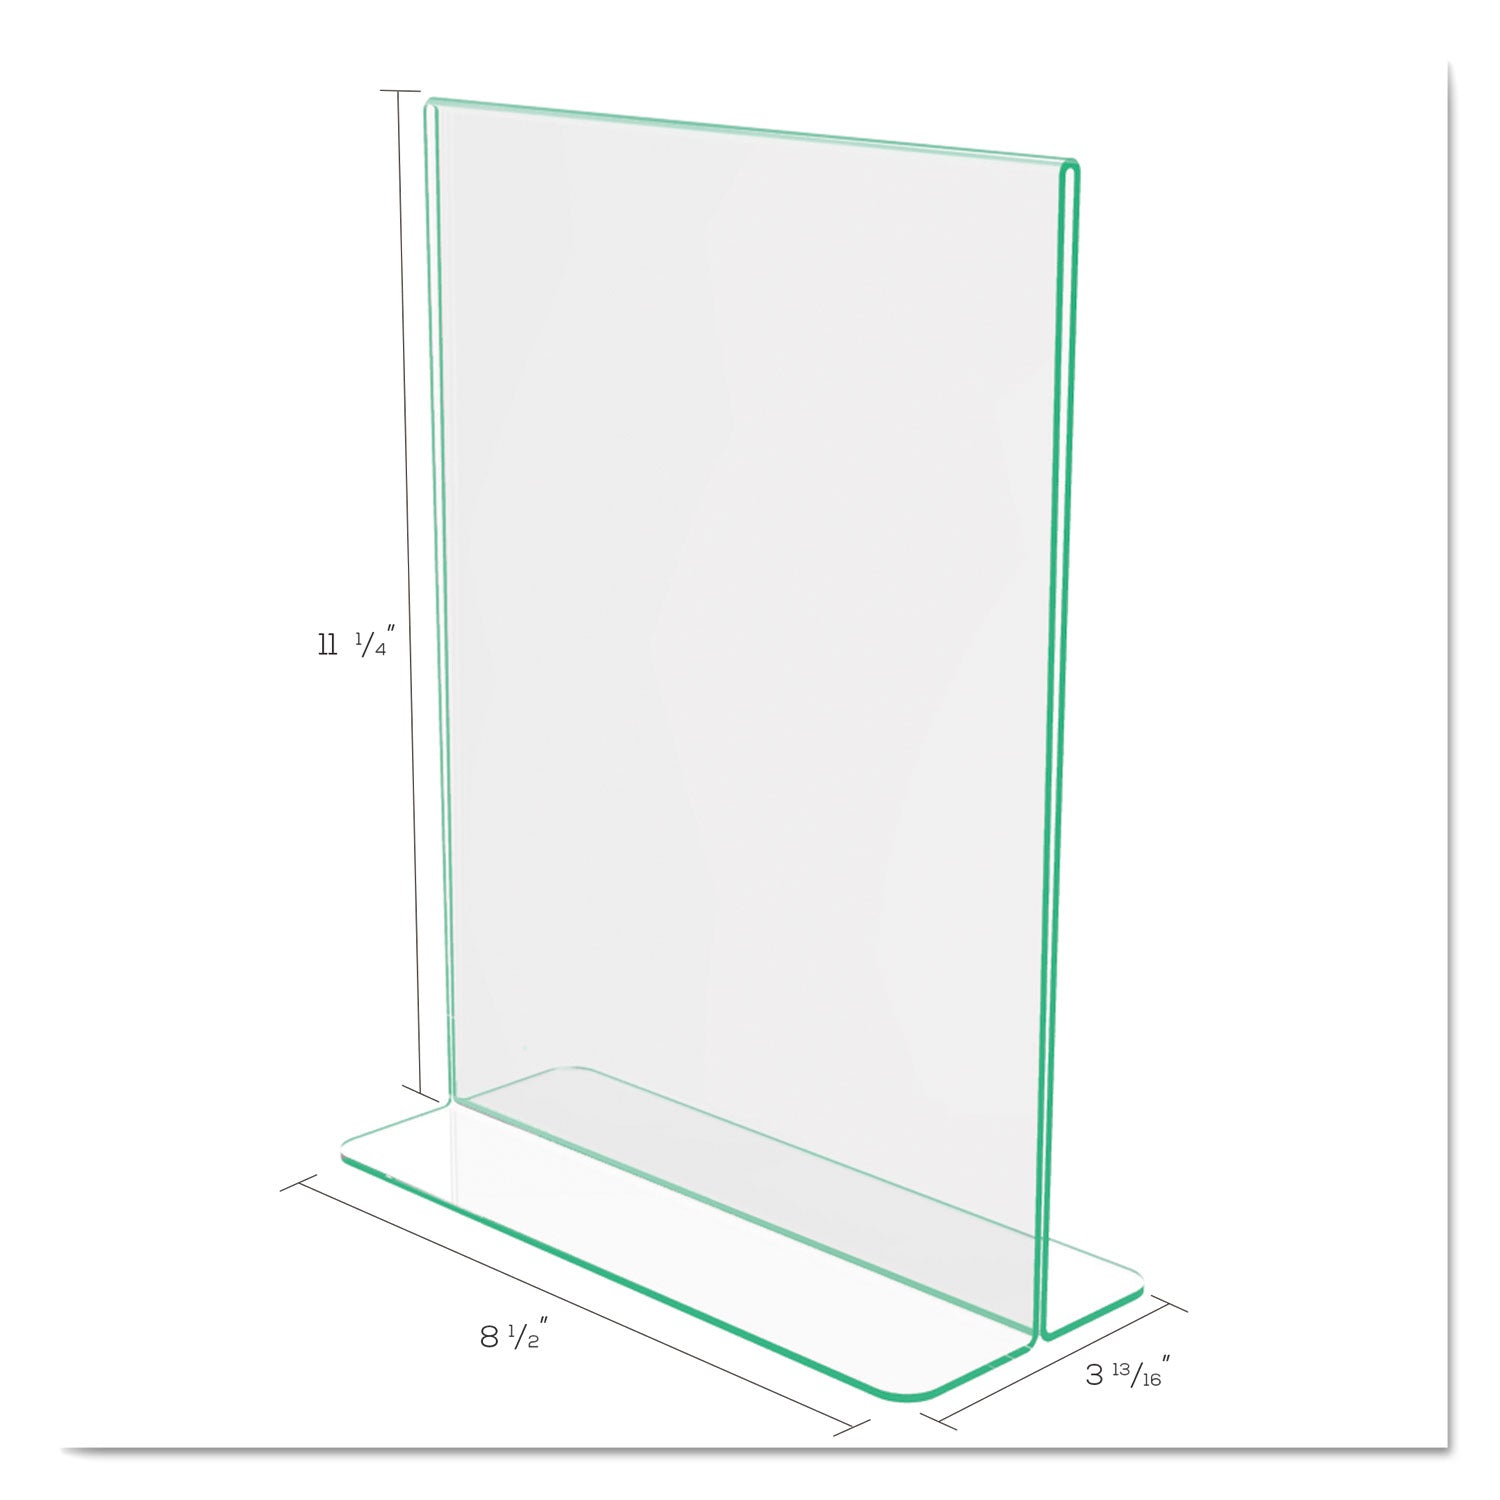 Superior Image Premium Green Edge Sign Holders, 8.5 x 11 Insert, Clear/Green - 